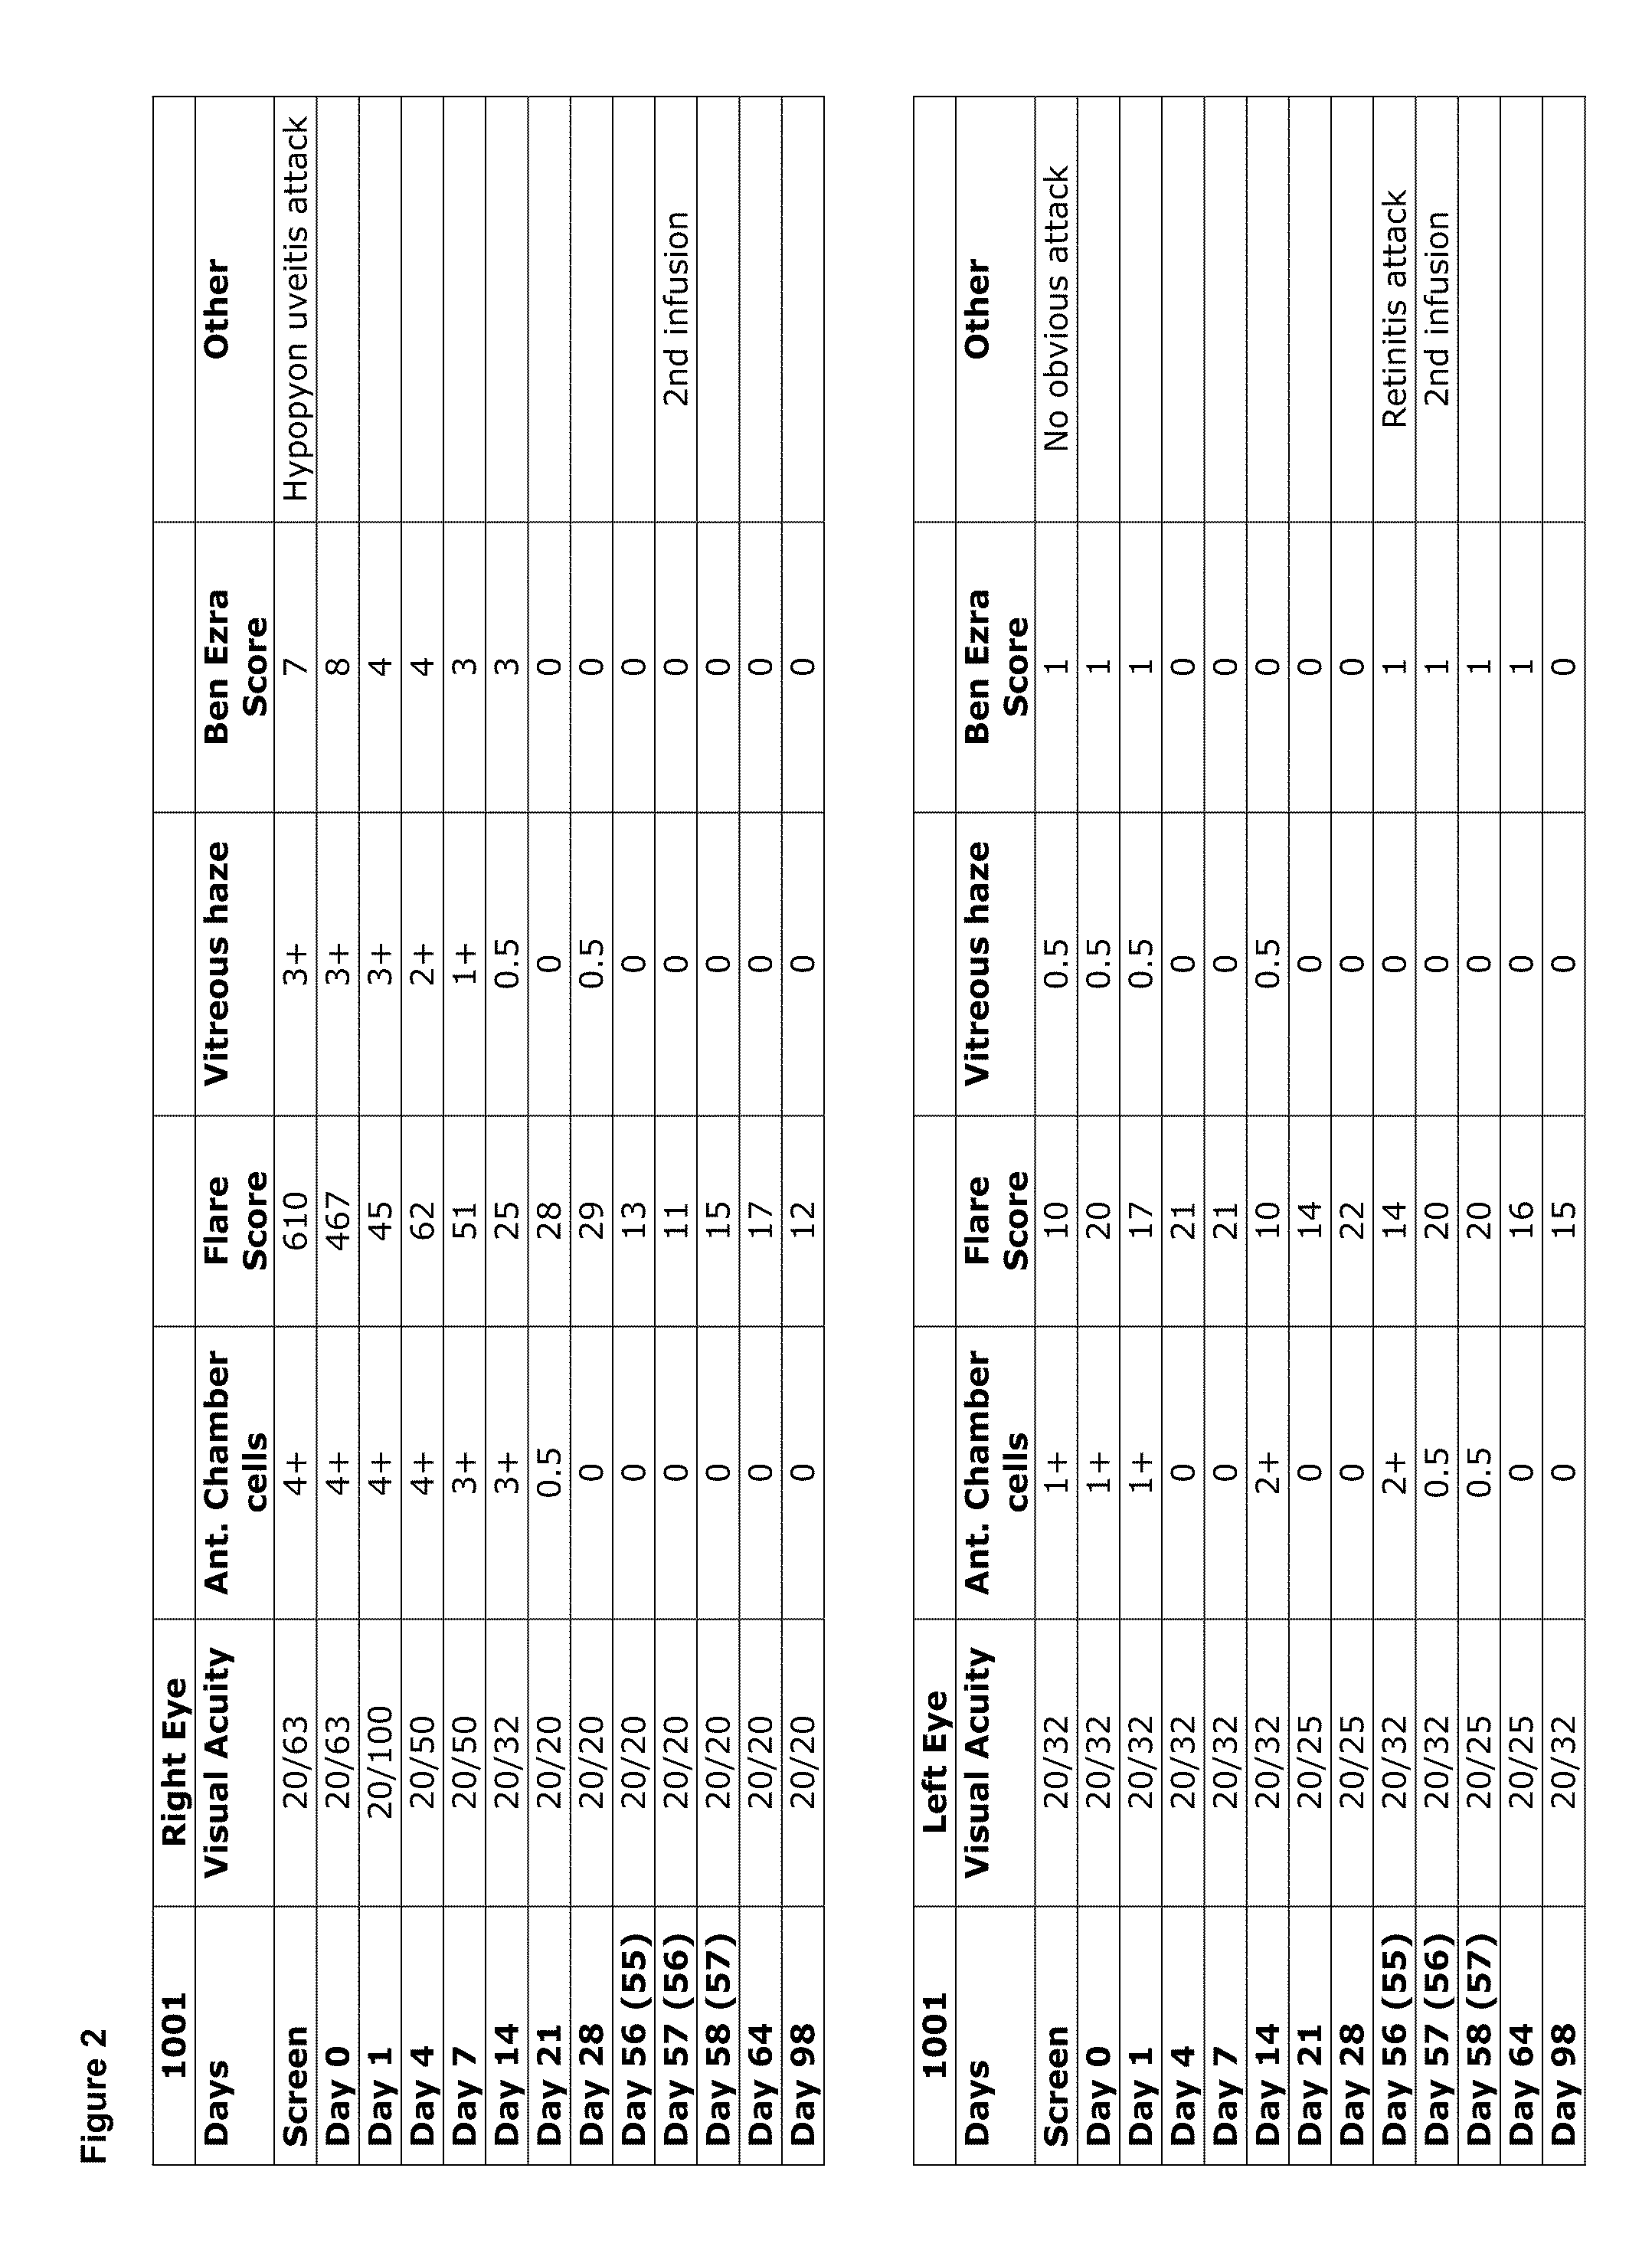 Methods for the treatment of il-1beta related conditions